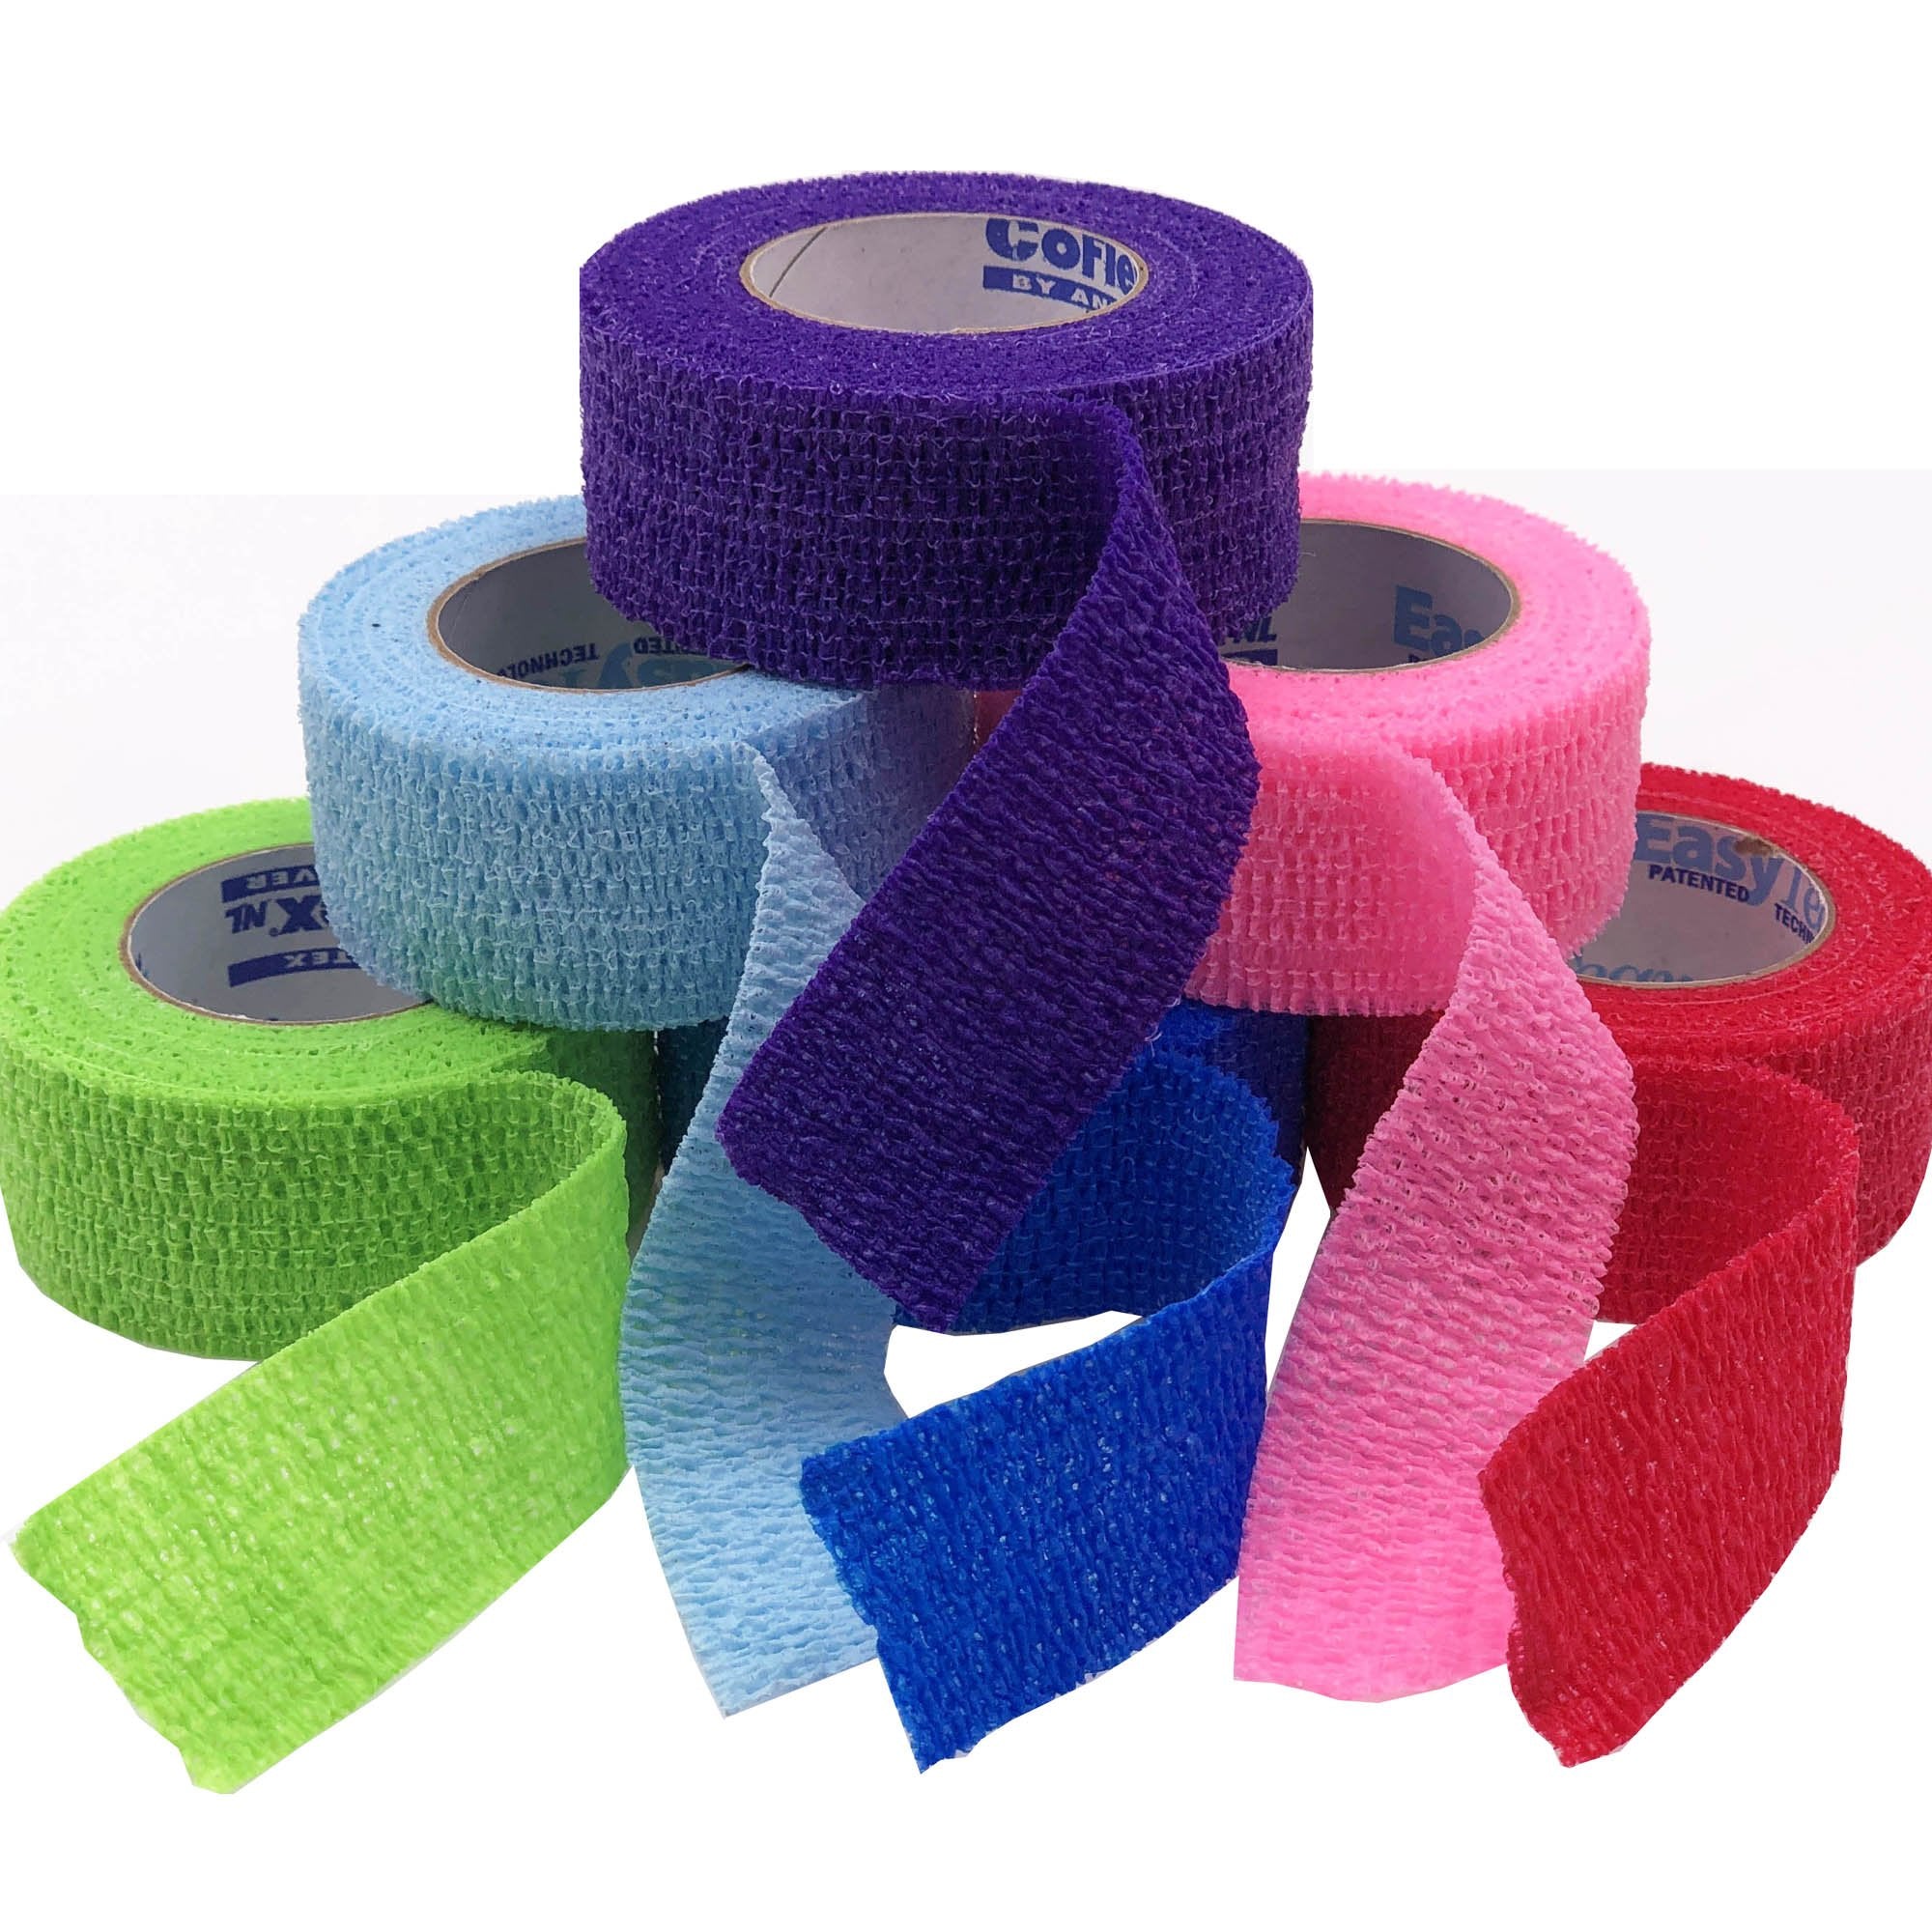 Cohesive Bandage CoFlex® NL 1 Inch X 5 Yard Self-Adherent Closure Neon Pink / Blue / Purple / Light Blue / Neon Green / Red NonSterile 12 lbs. Tensile Strength